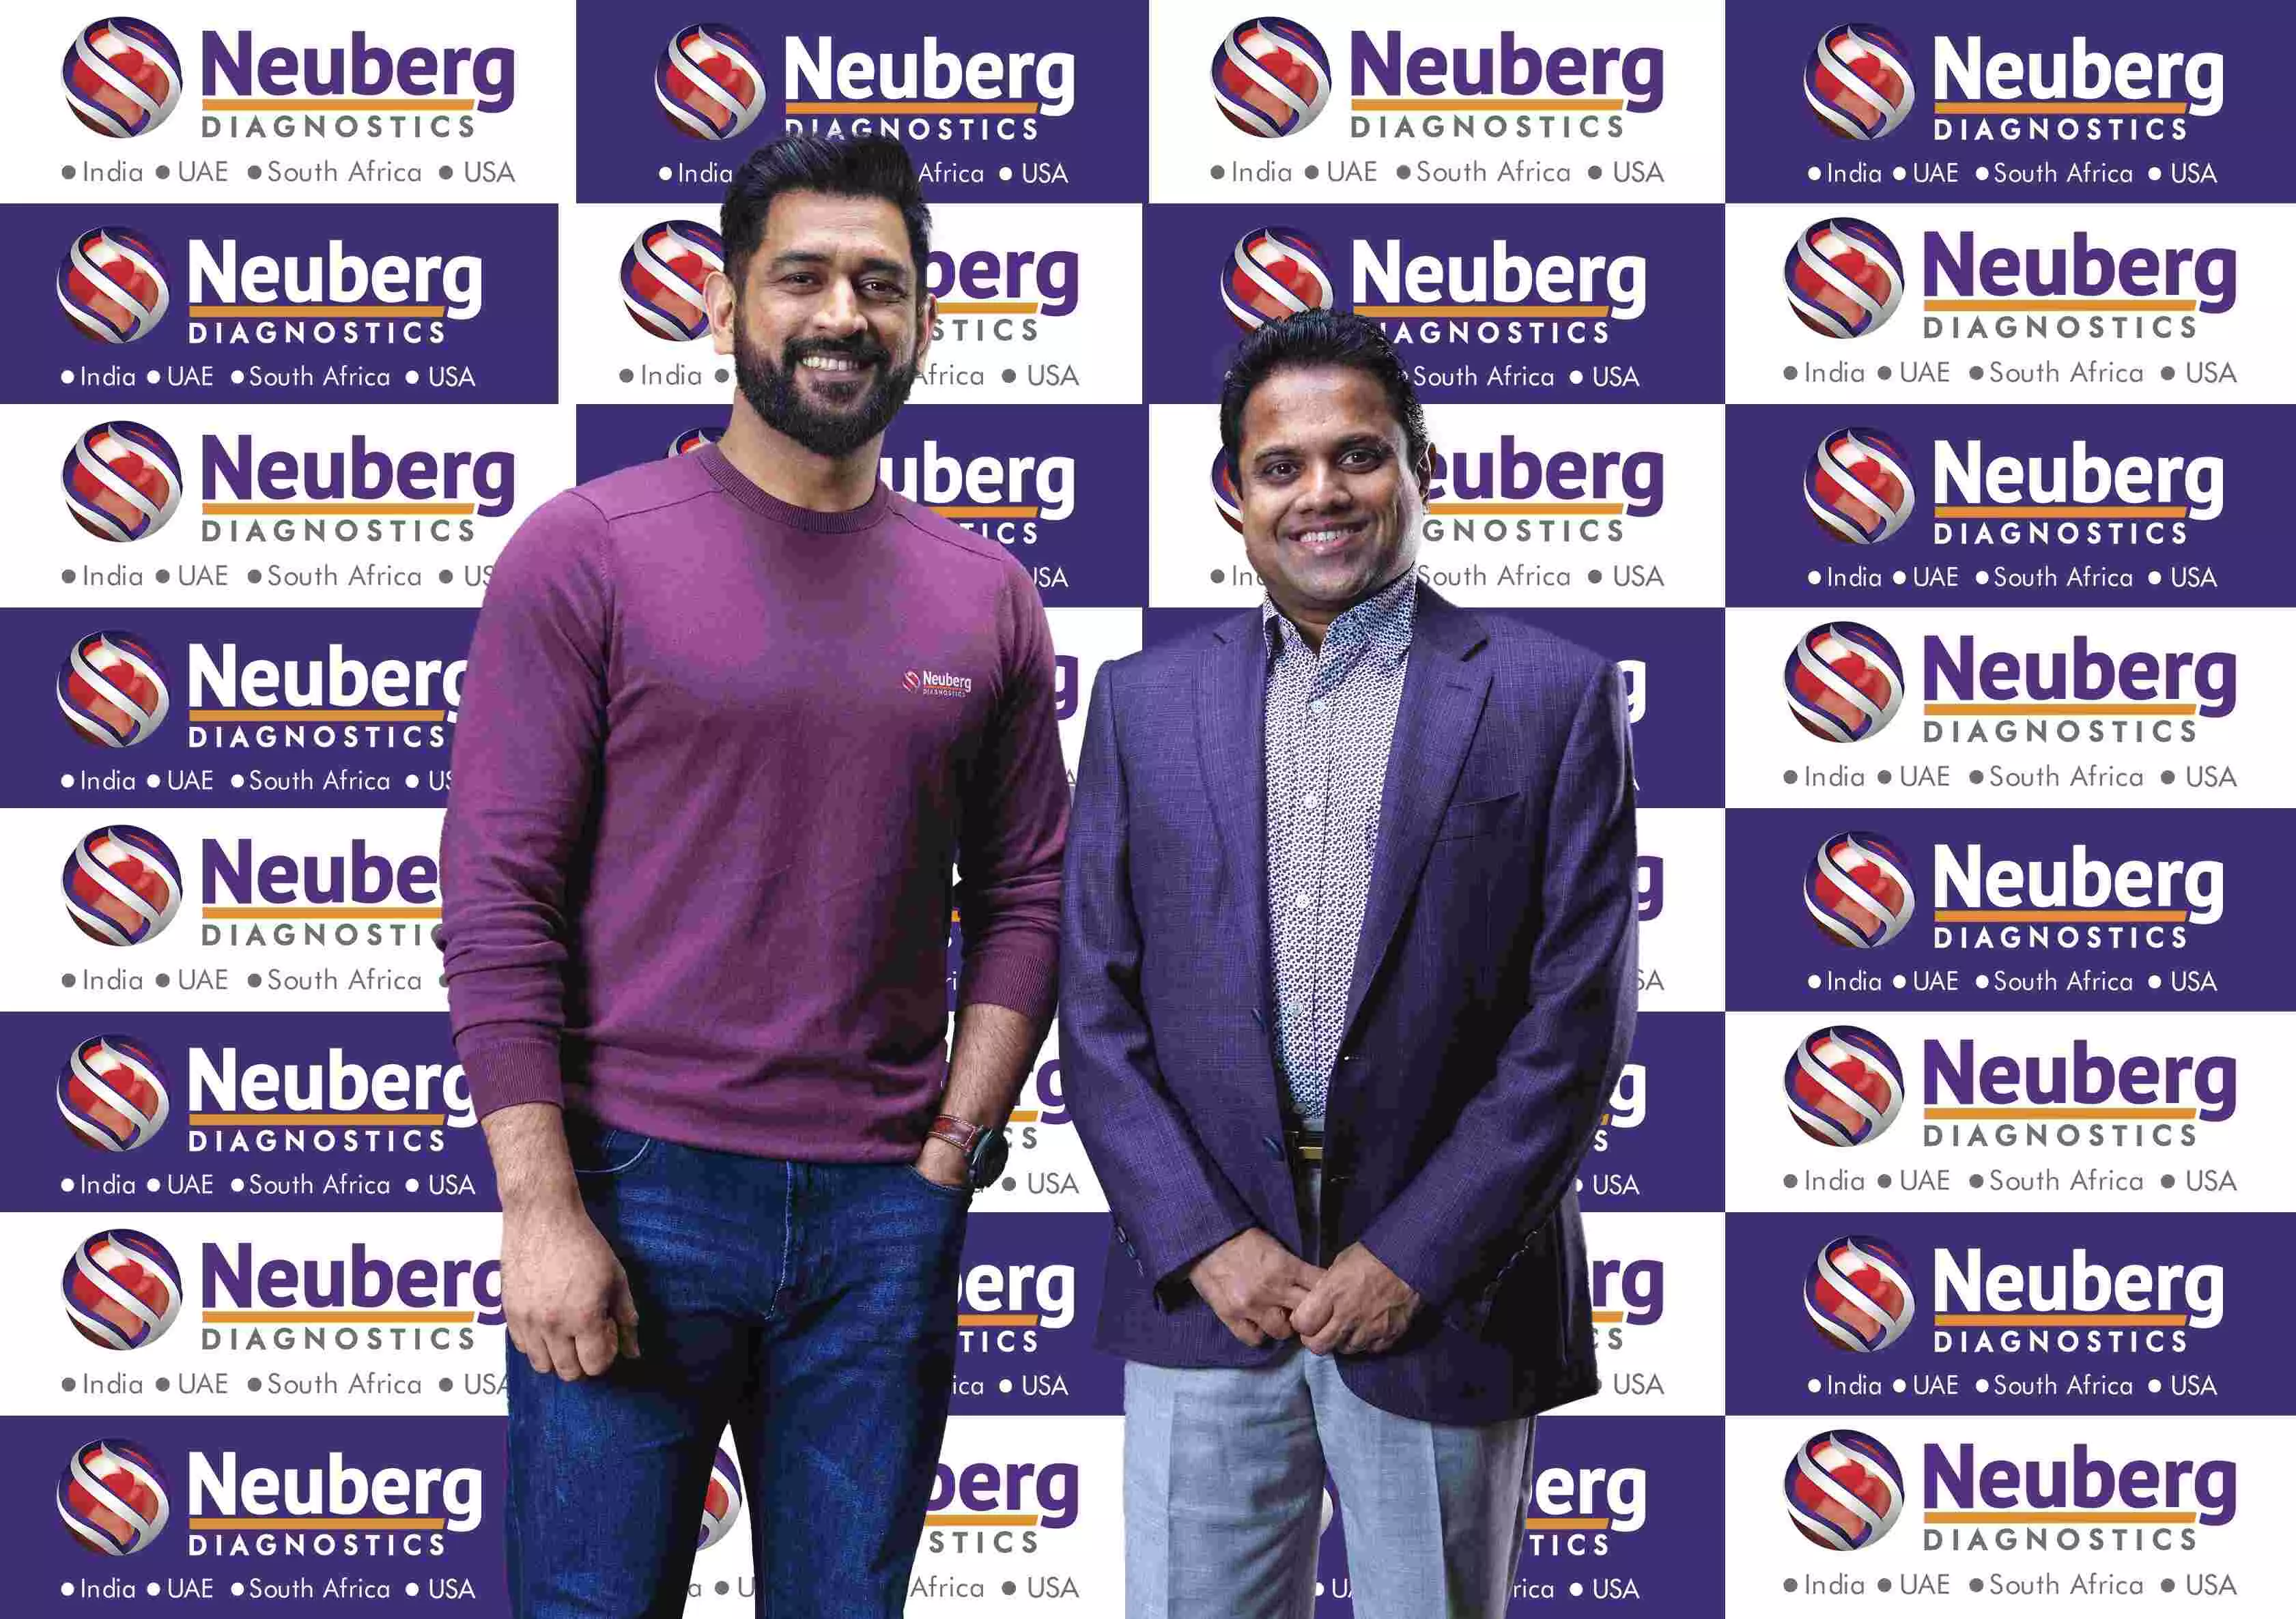 Neuberg Diagnostics, Indias fourth largest diagnostics lab chain, has partnered with MS Dhoni to send the message of health and wellness